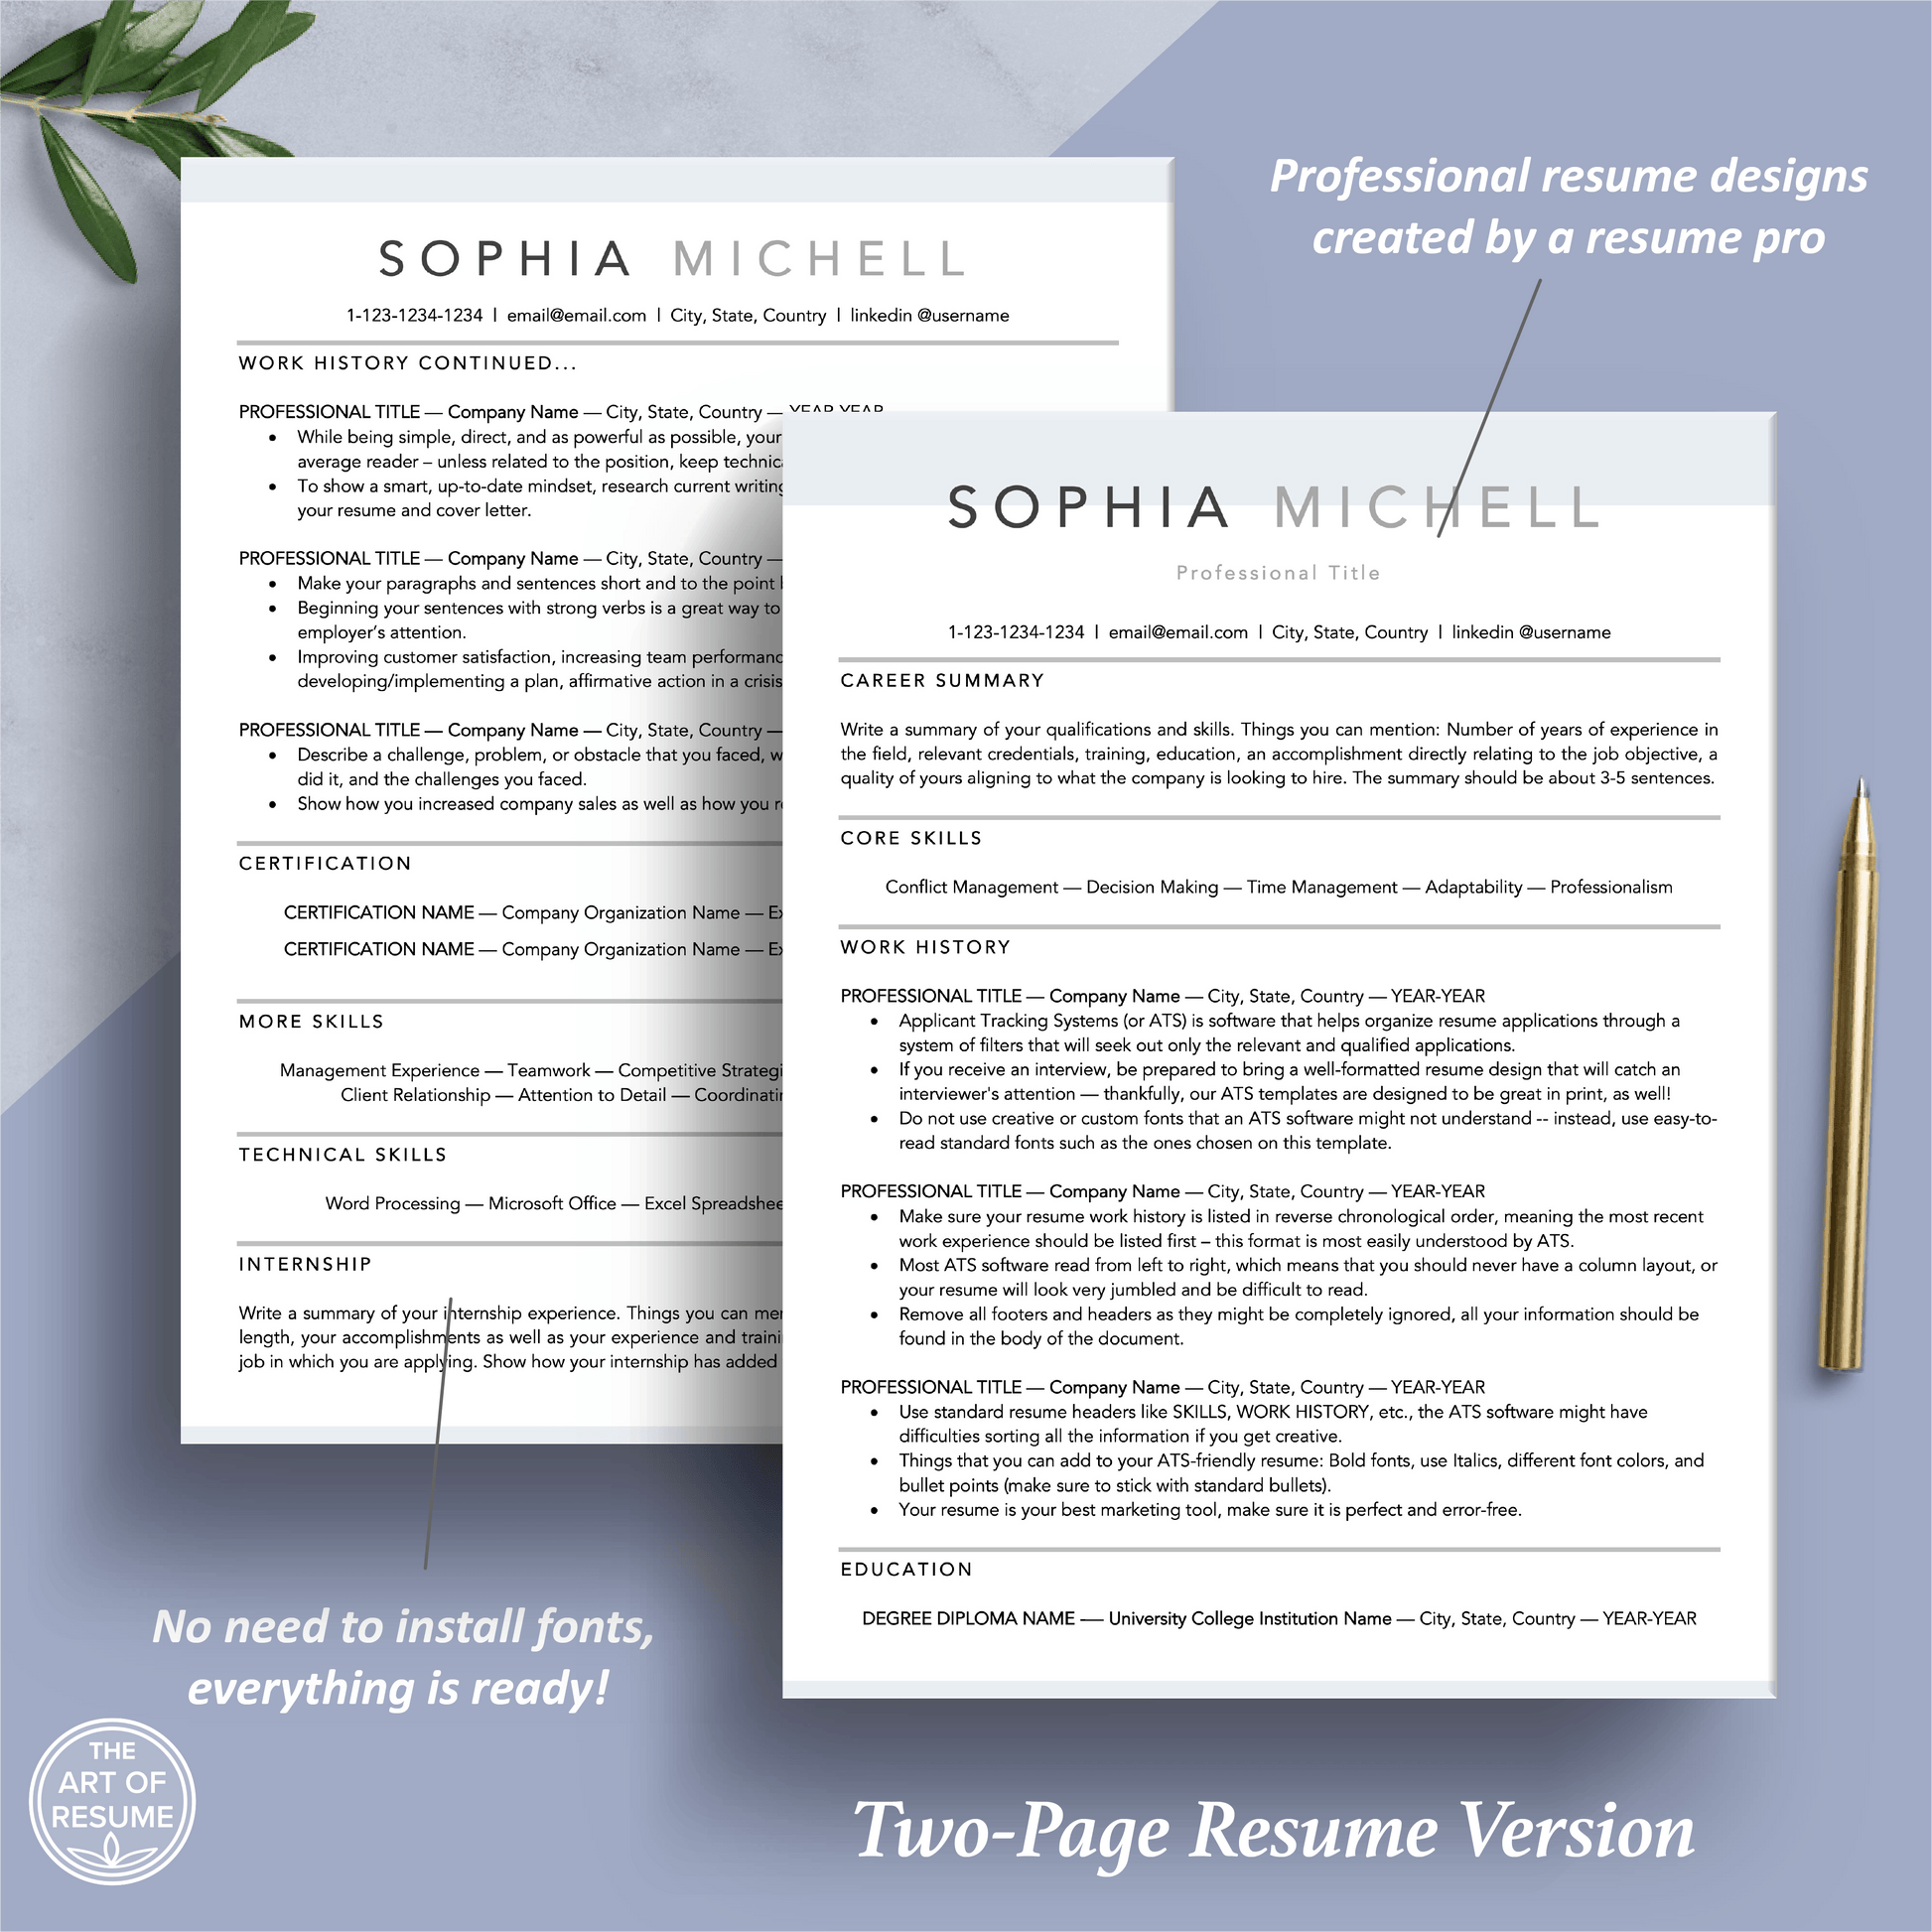 The Art of Resume Templates | Two Page Professional Simple Executive Resume CV Template | Curriculum Vitae